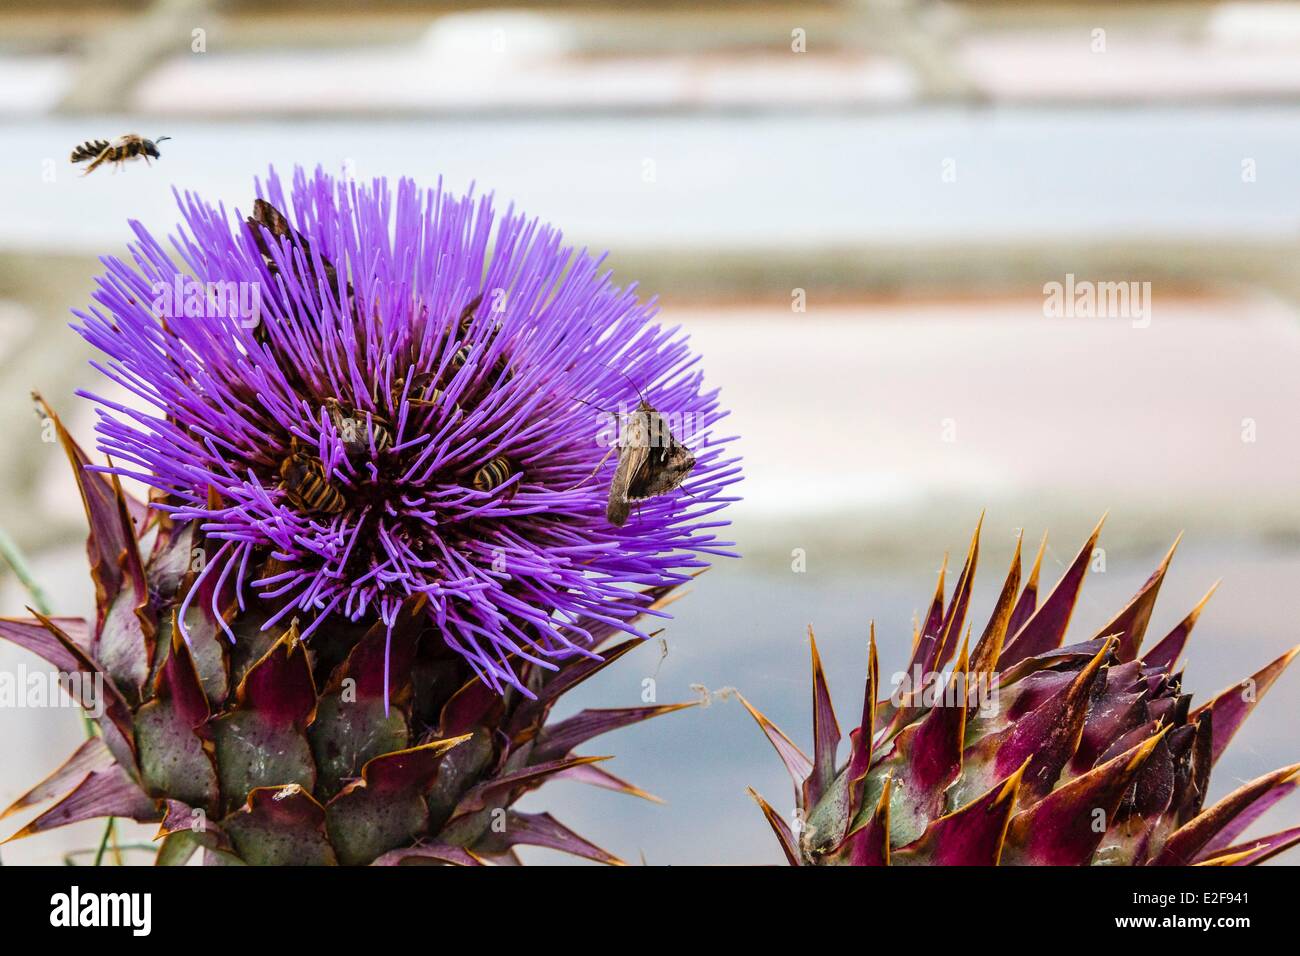 France, Vendee, l'Ile-d'Olonne, insects in a cardoon flower Stock Photo